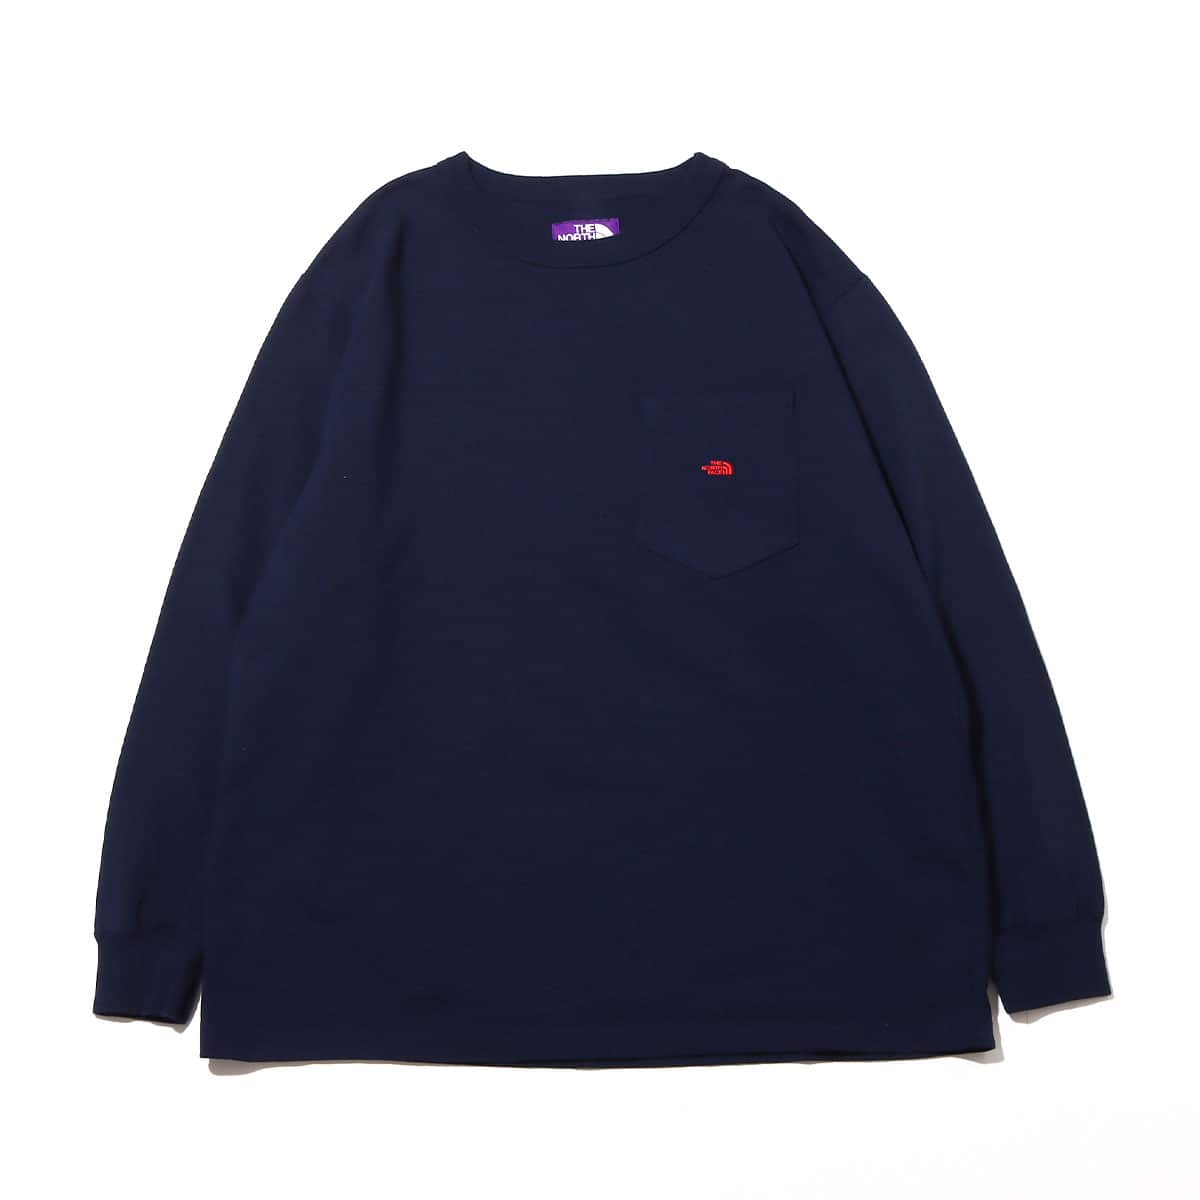 THE NORTH FACE PURPLE LABEL 7oz L/S Pocket Tee Navy X 